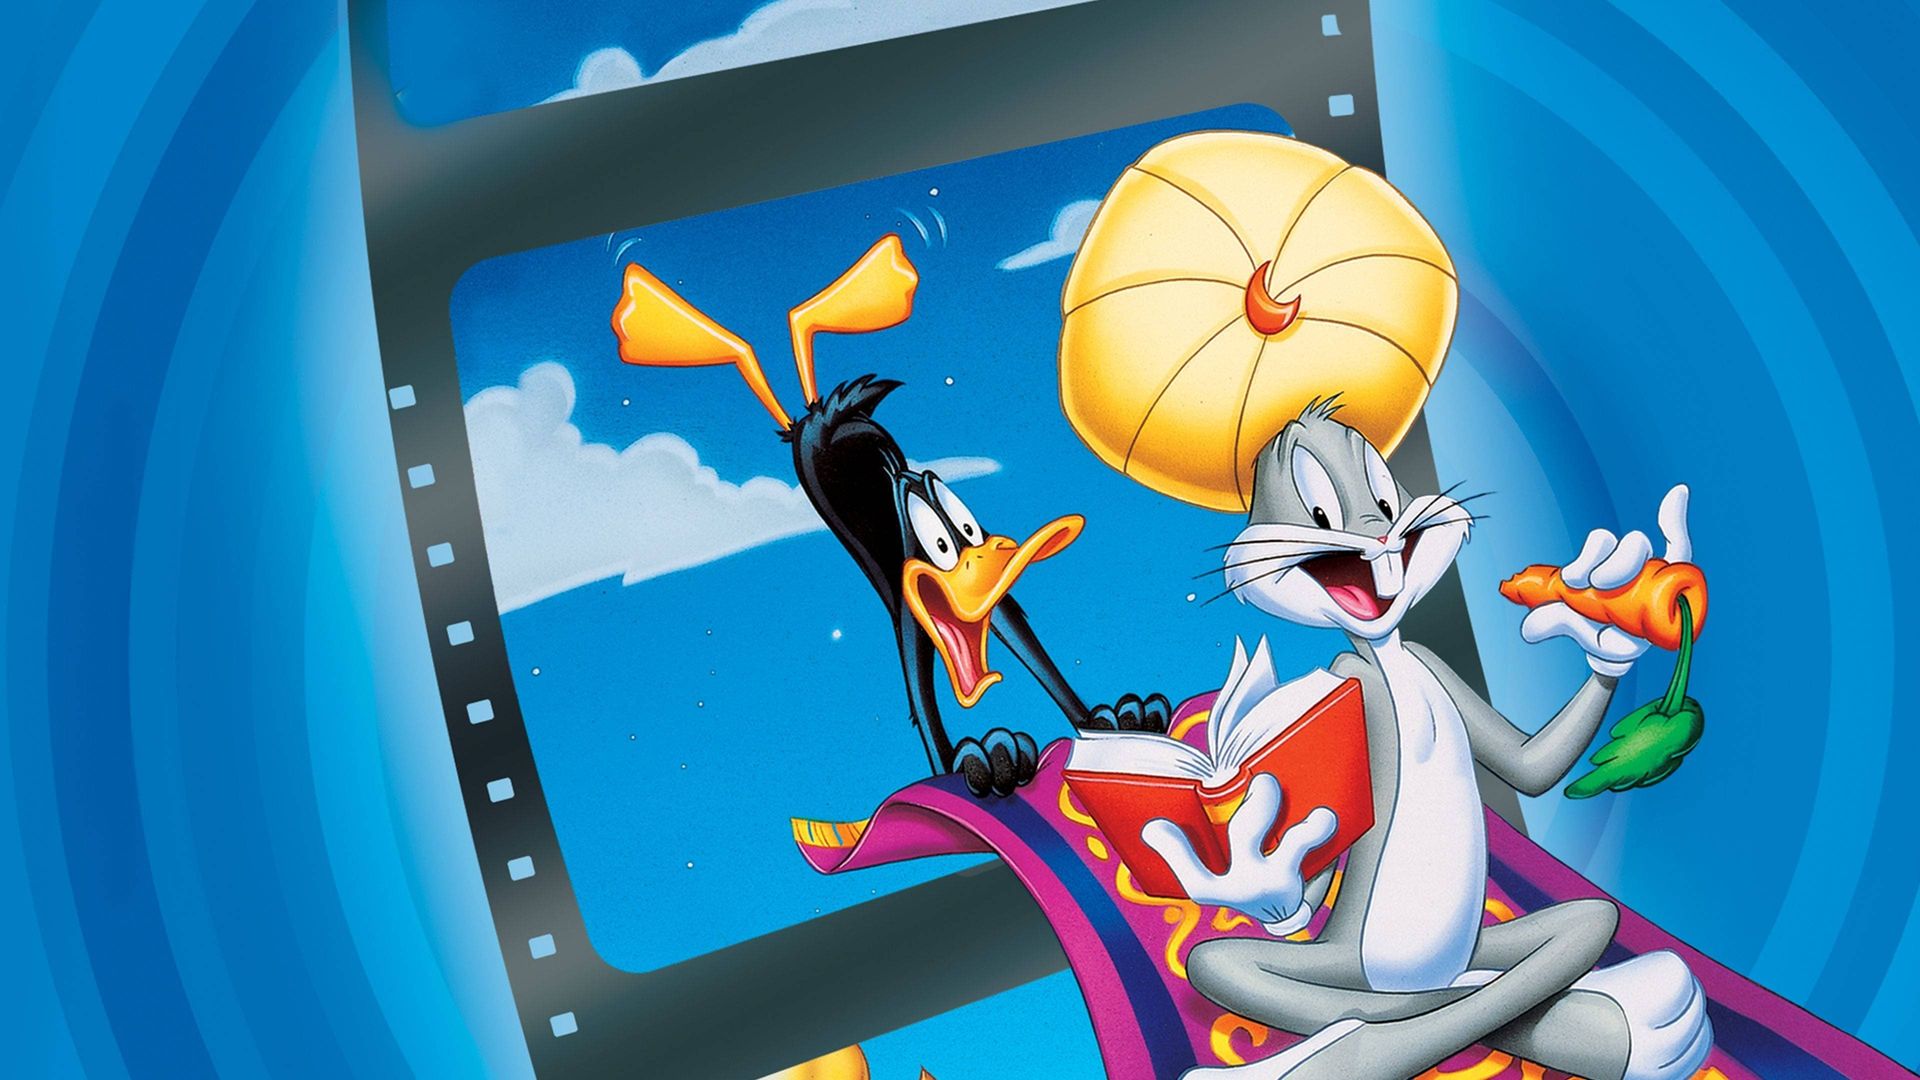 Bugs Bunny's 3rd Movie: 1001 Rabbit Tales background